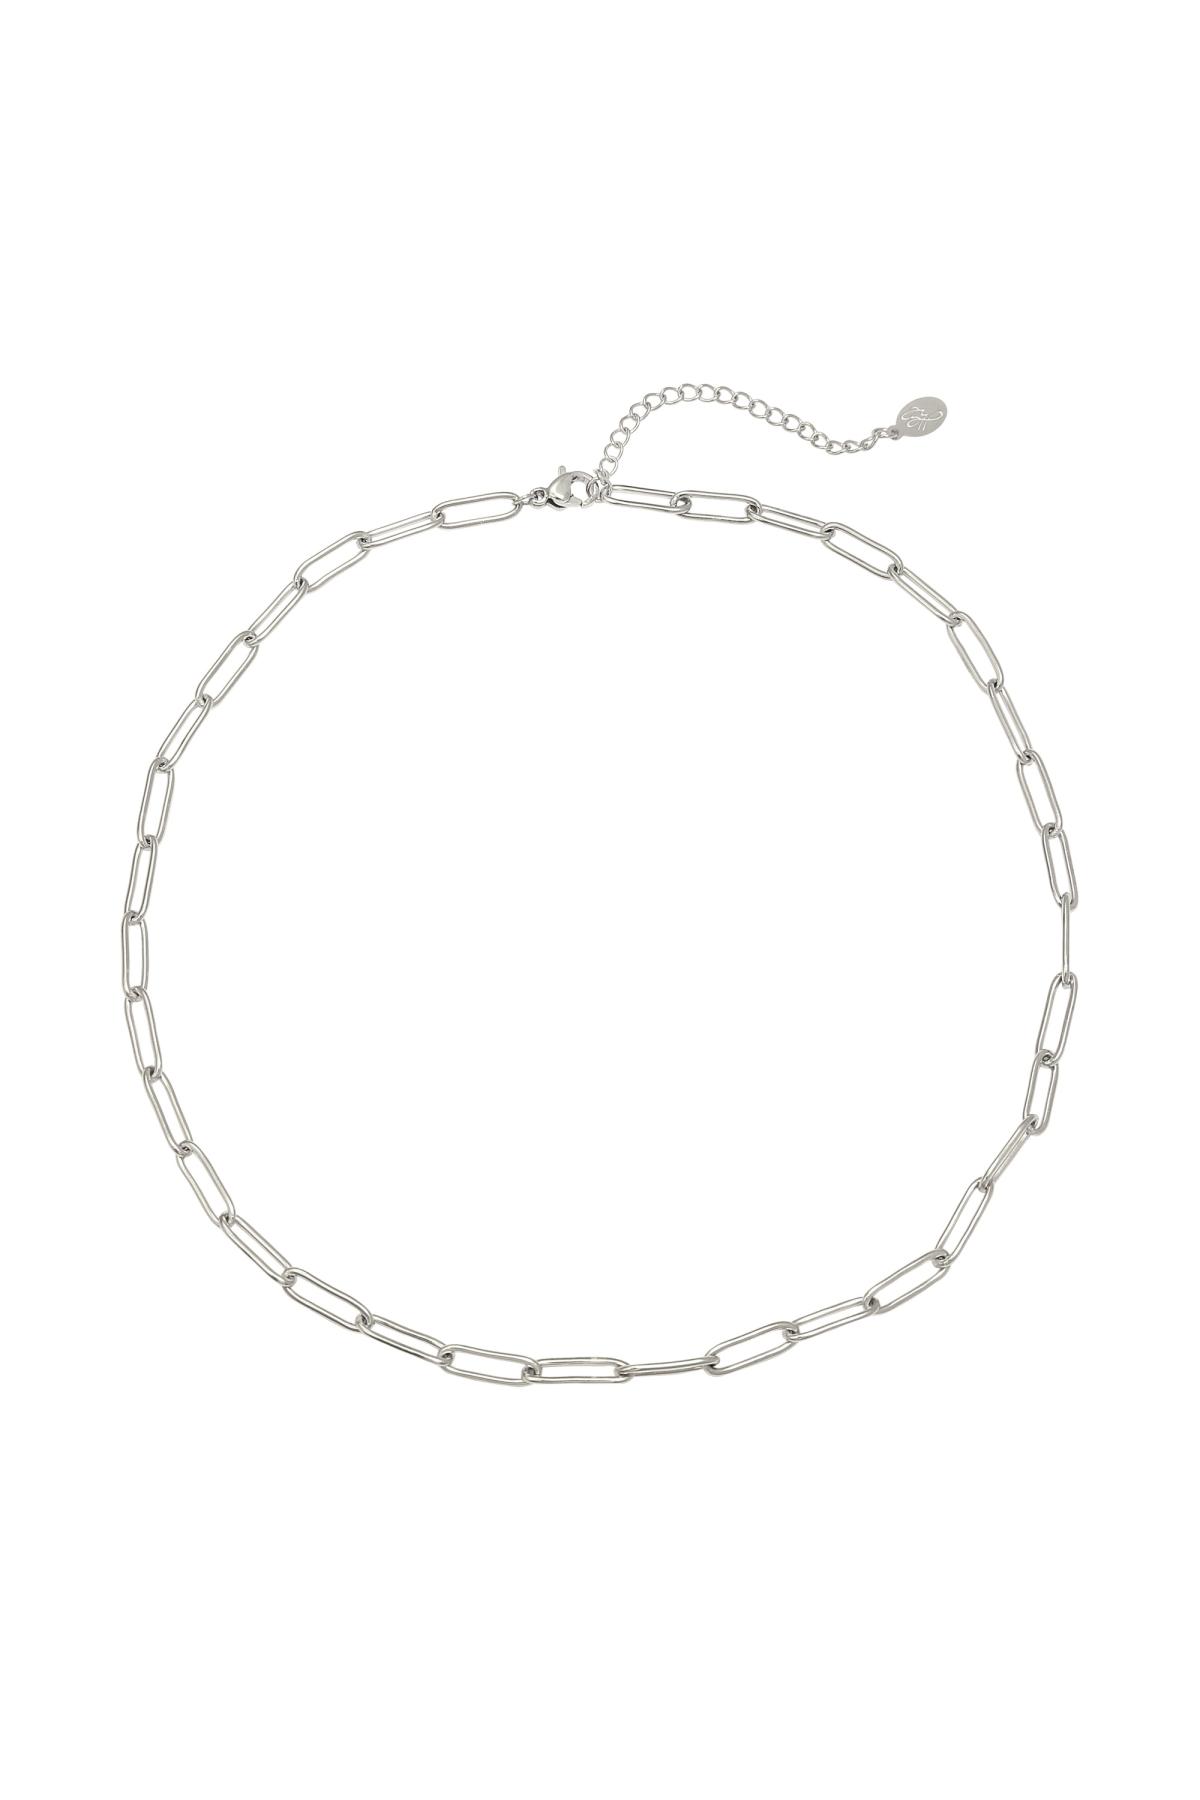 Collar Chained Up Plata Acero inoxidable h5 